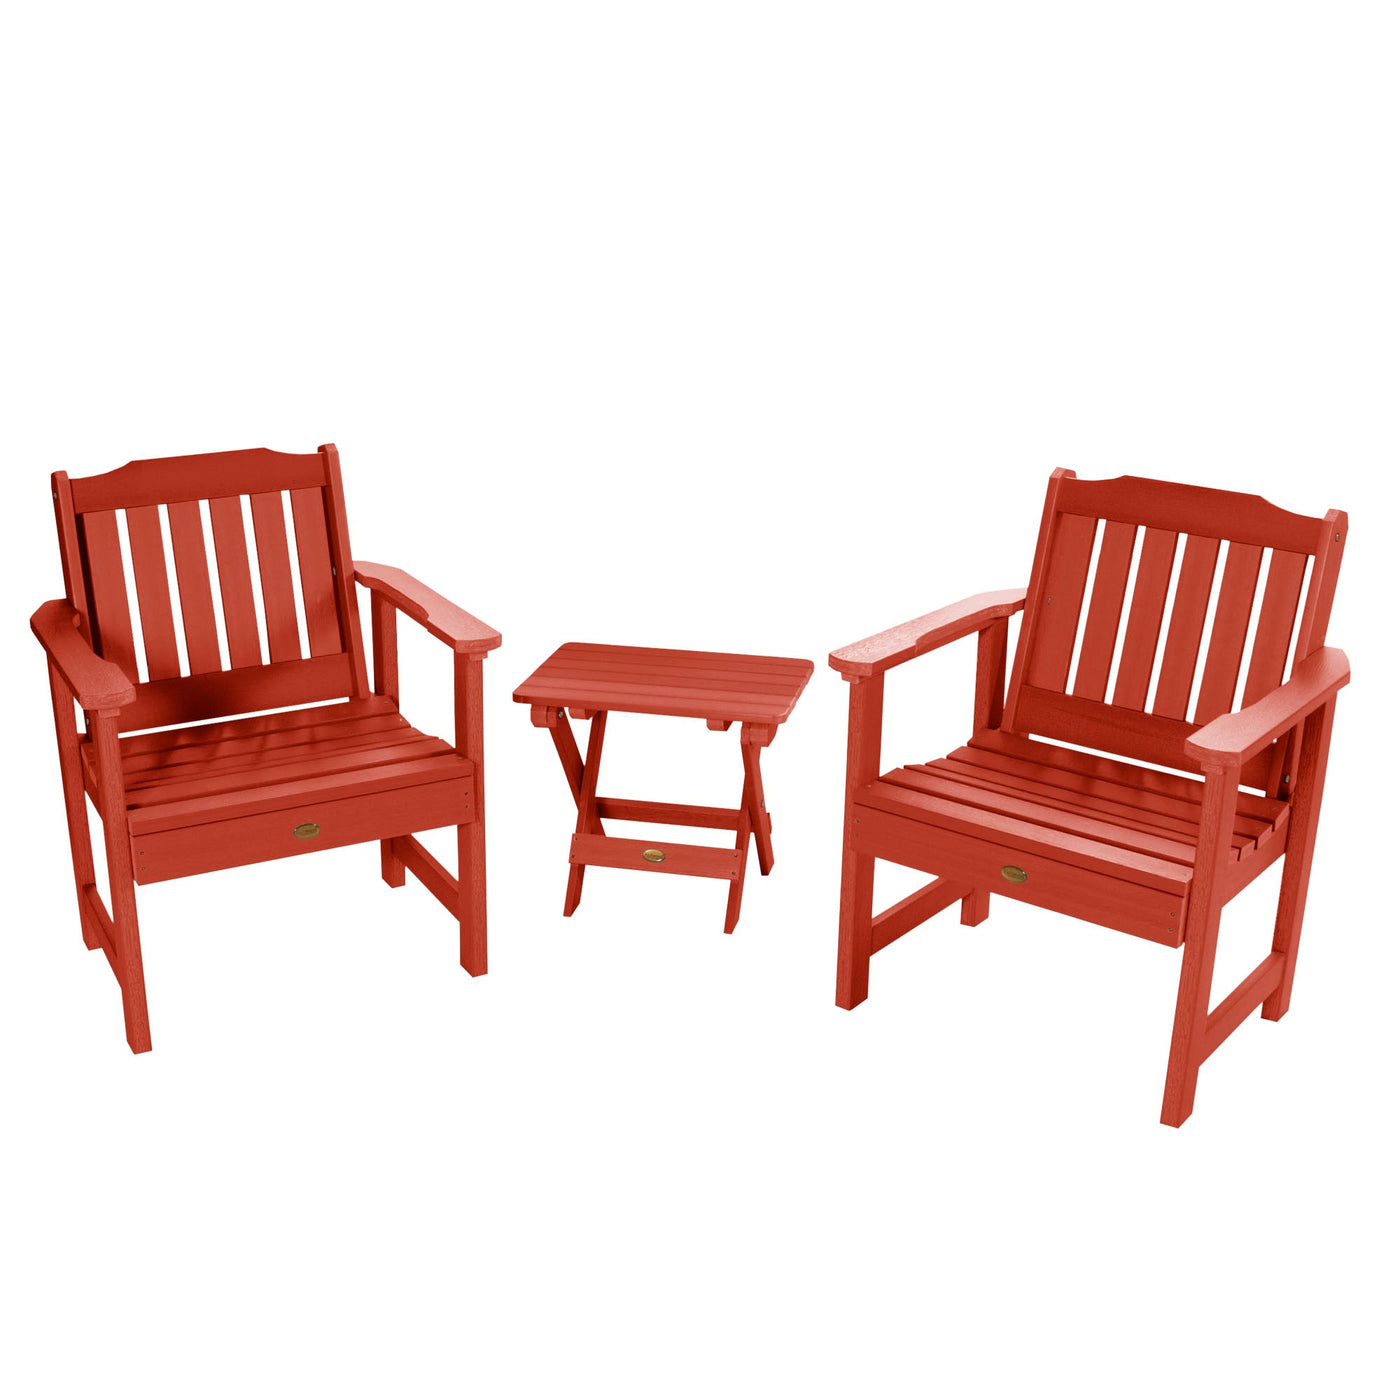 2 Lehigh Garden Chairs with Folding Adirondack Side Table Kitted Sets Highwood USA Rustic Red 